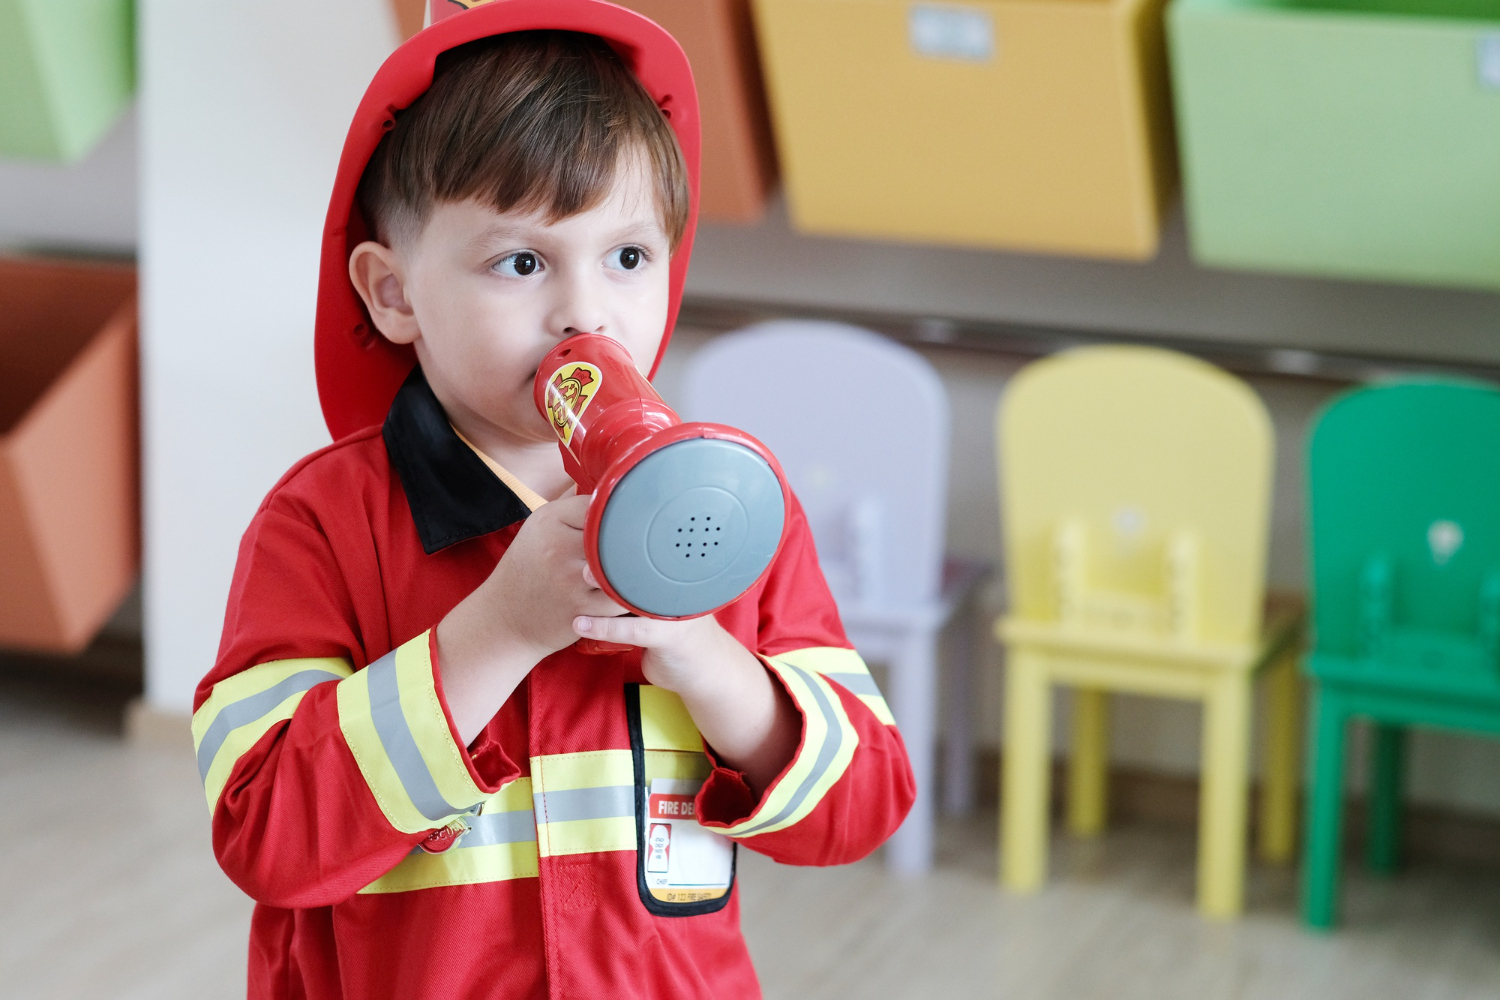 10 Fun and Engaging Fire Safety Facts for Kids